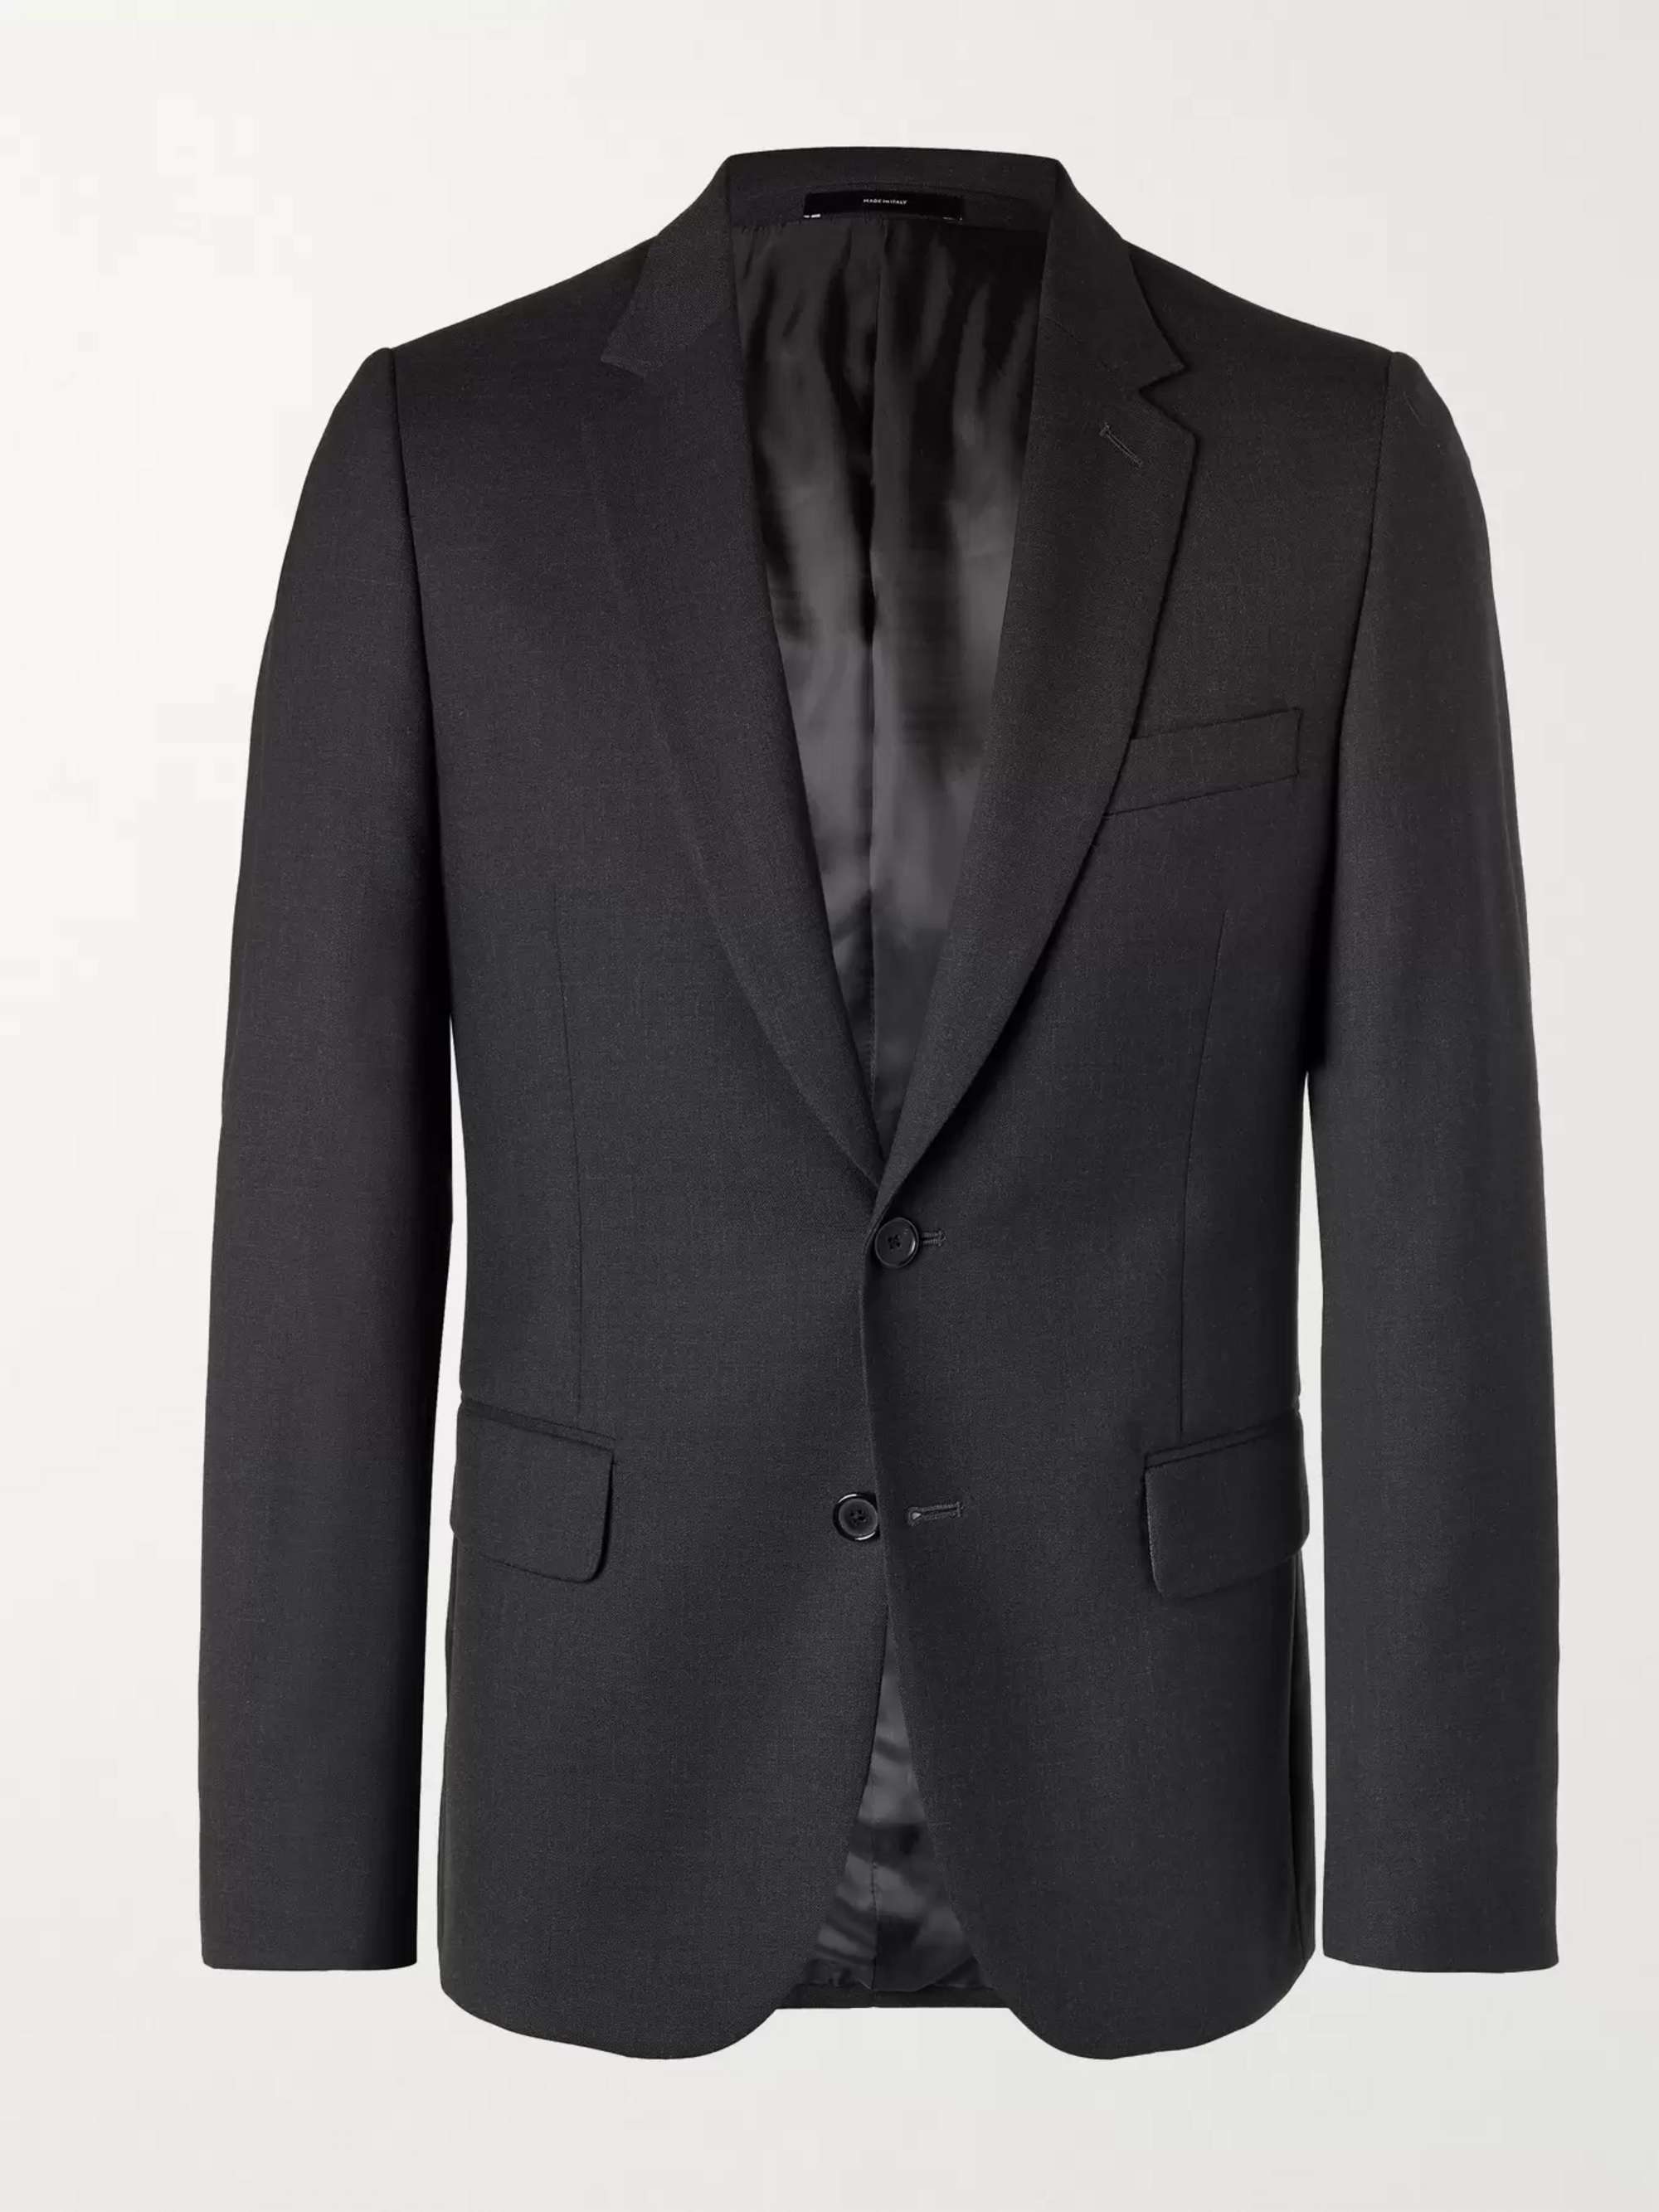 Example Reductor stall Gray Soho Wool Suit Jacket | PAUL SMITH | MR PORTER